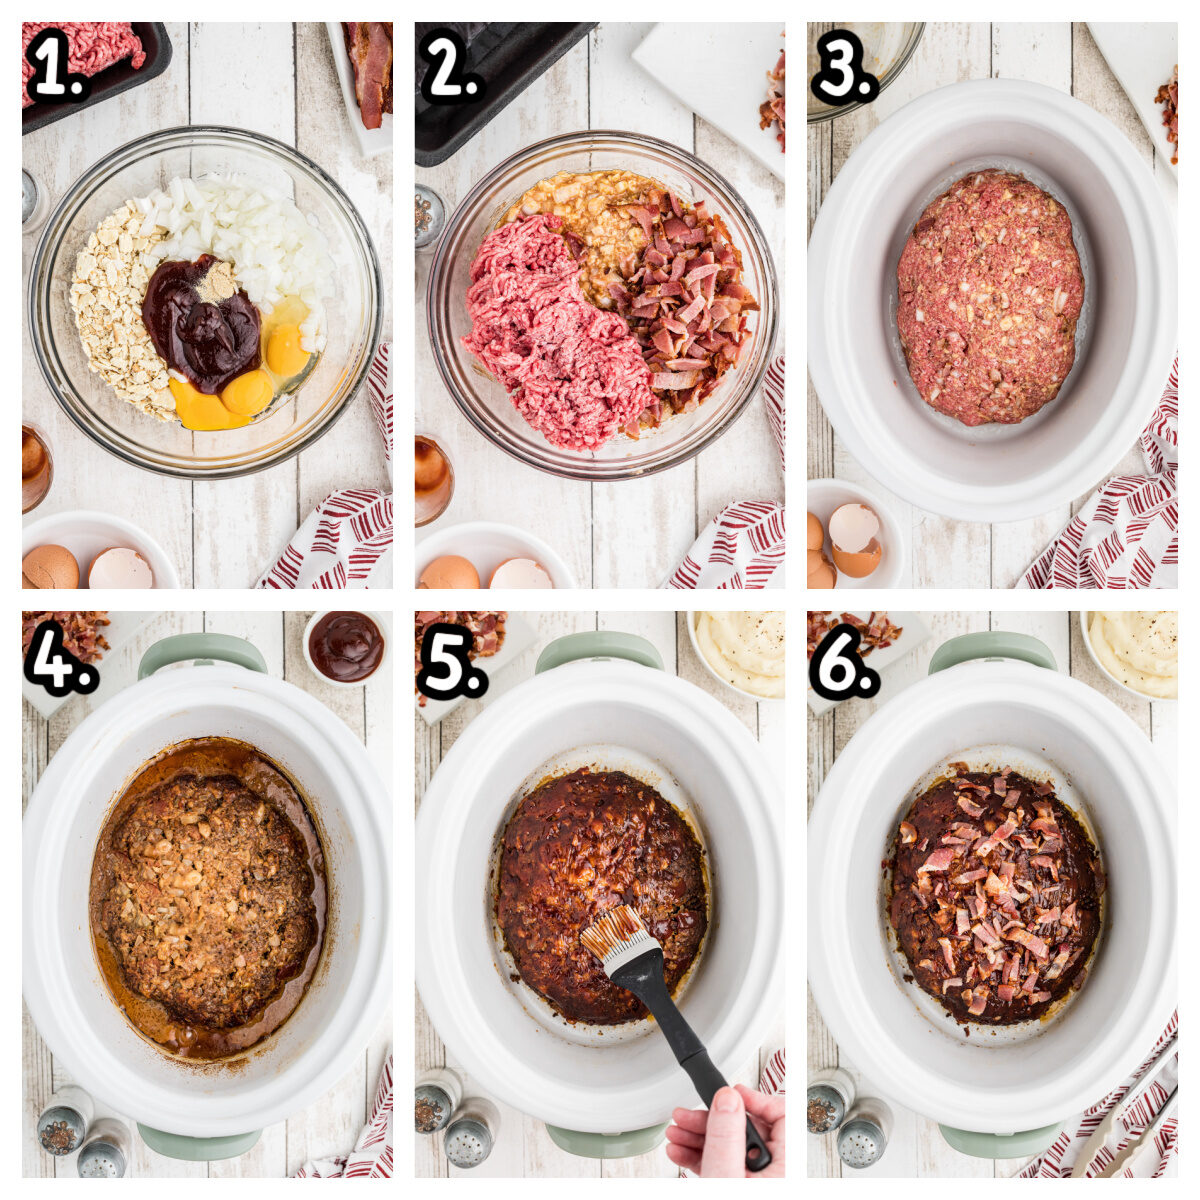 6 images showing how to make bacon barbecue meatloaf in a crockpot.